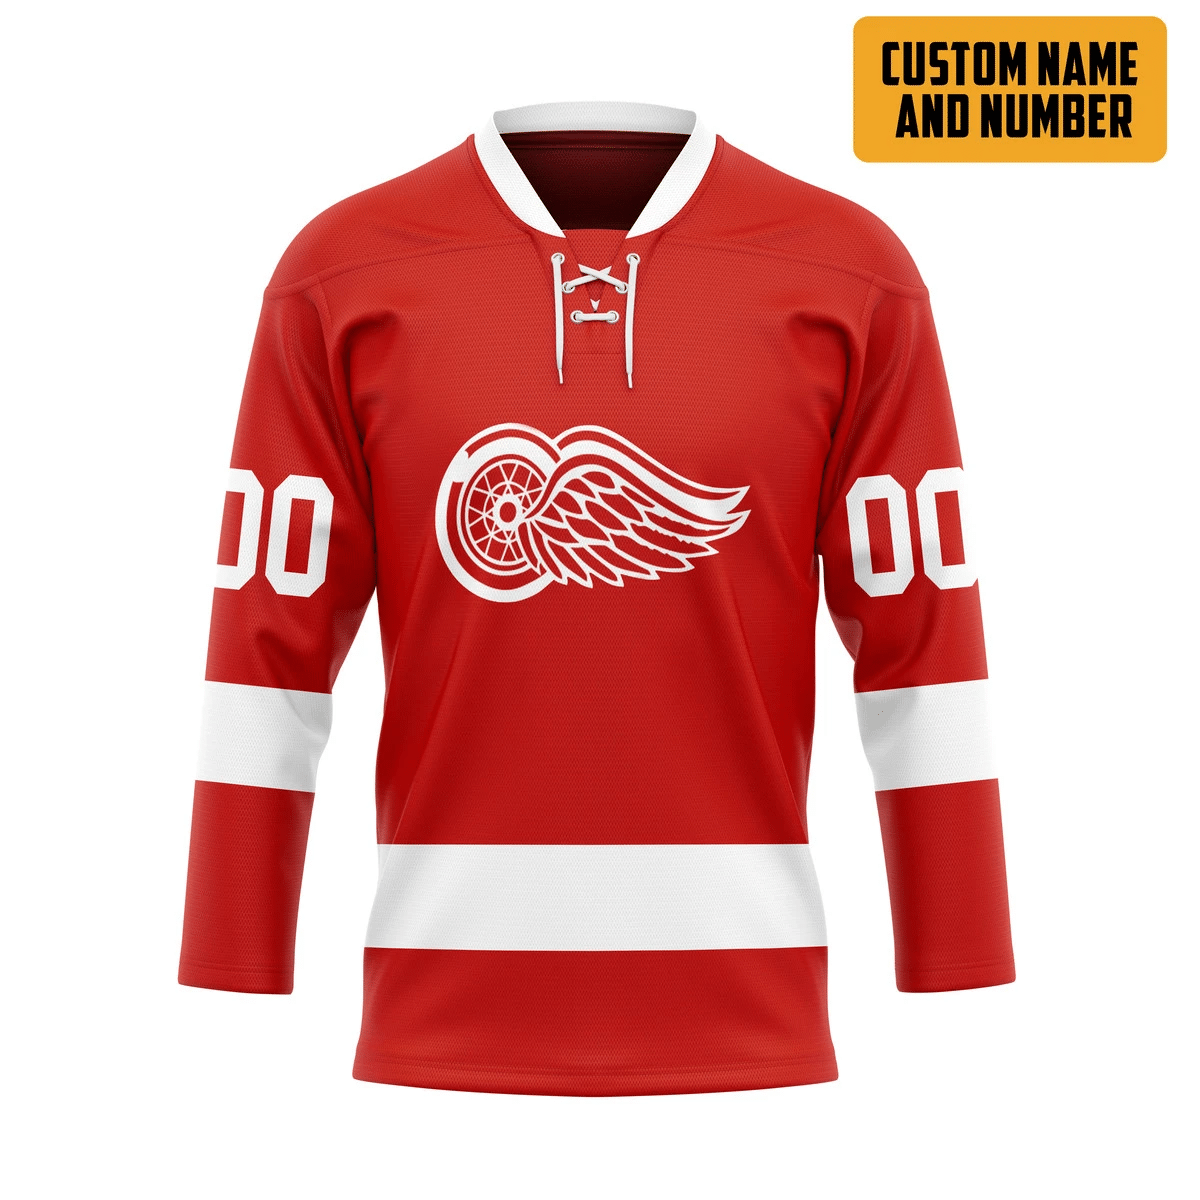 We have many different types of hockey jerseys. 10